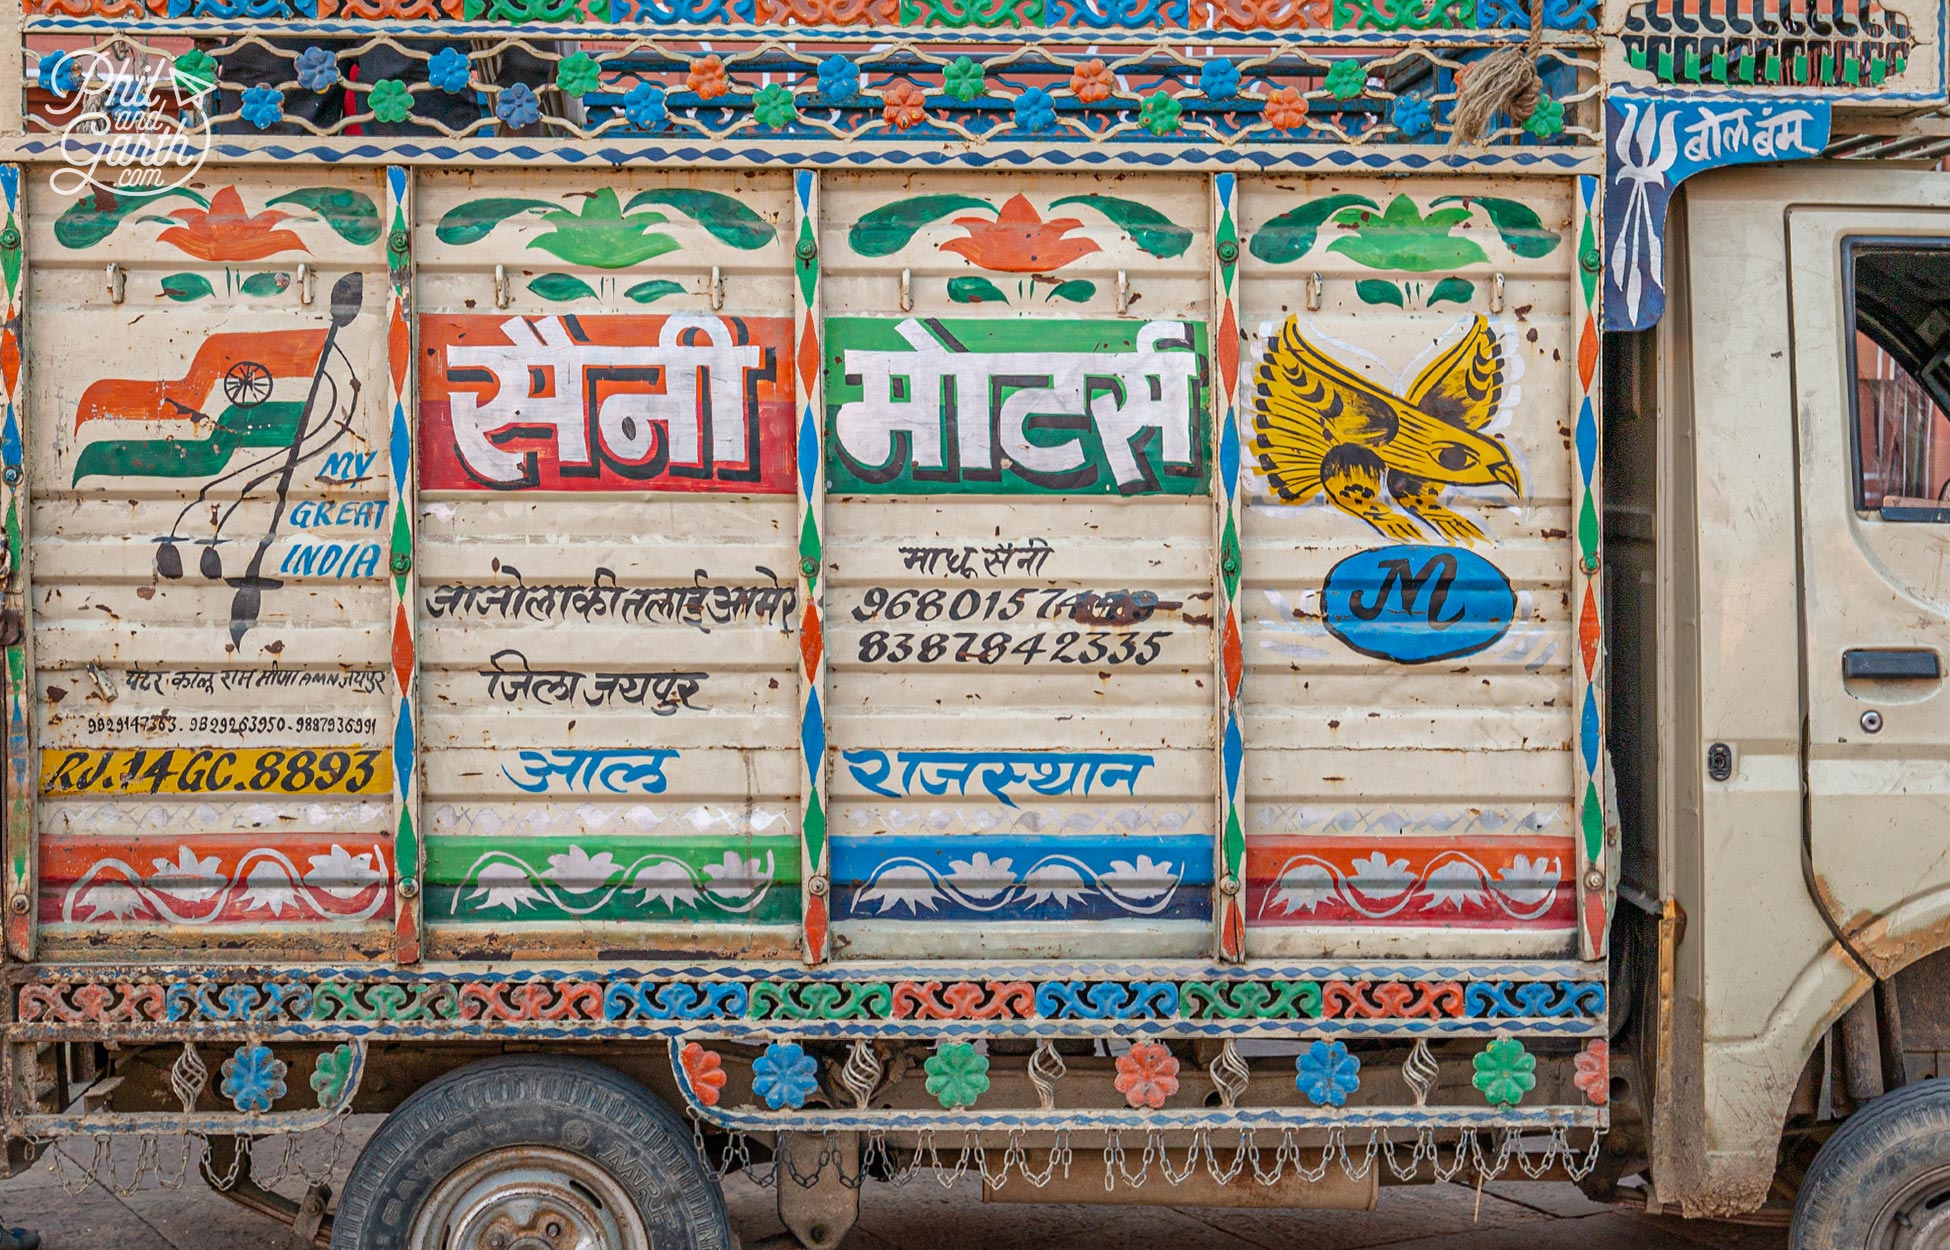 Indians really know how to decorate their delivery trucks!